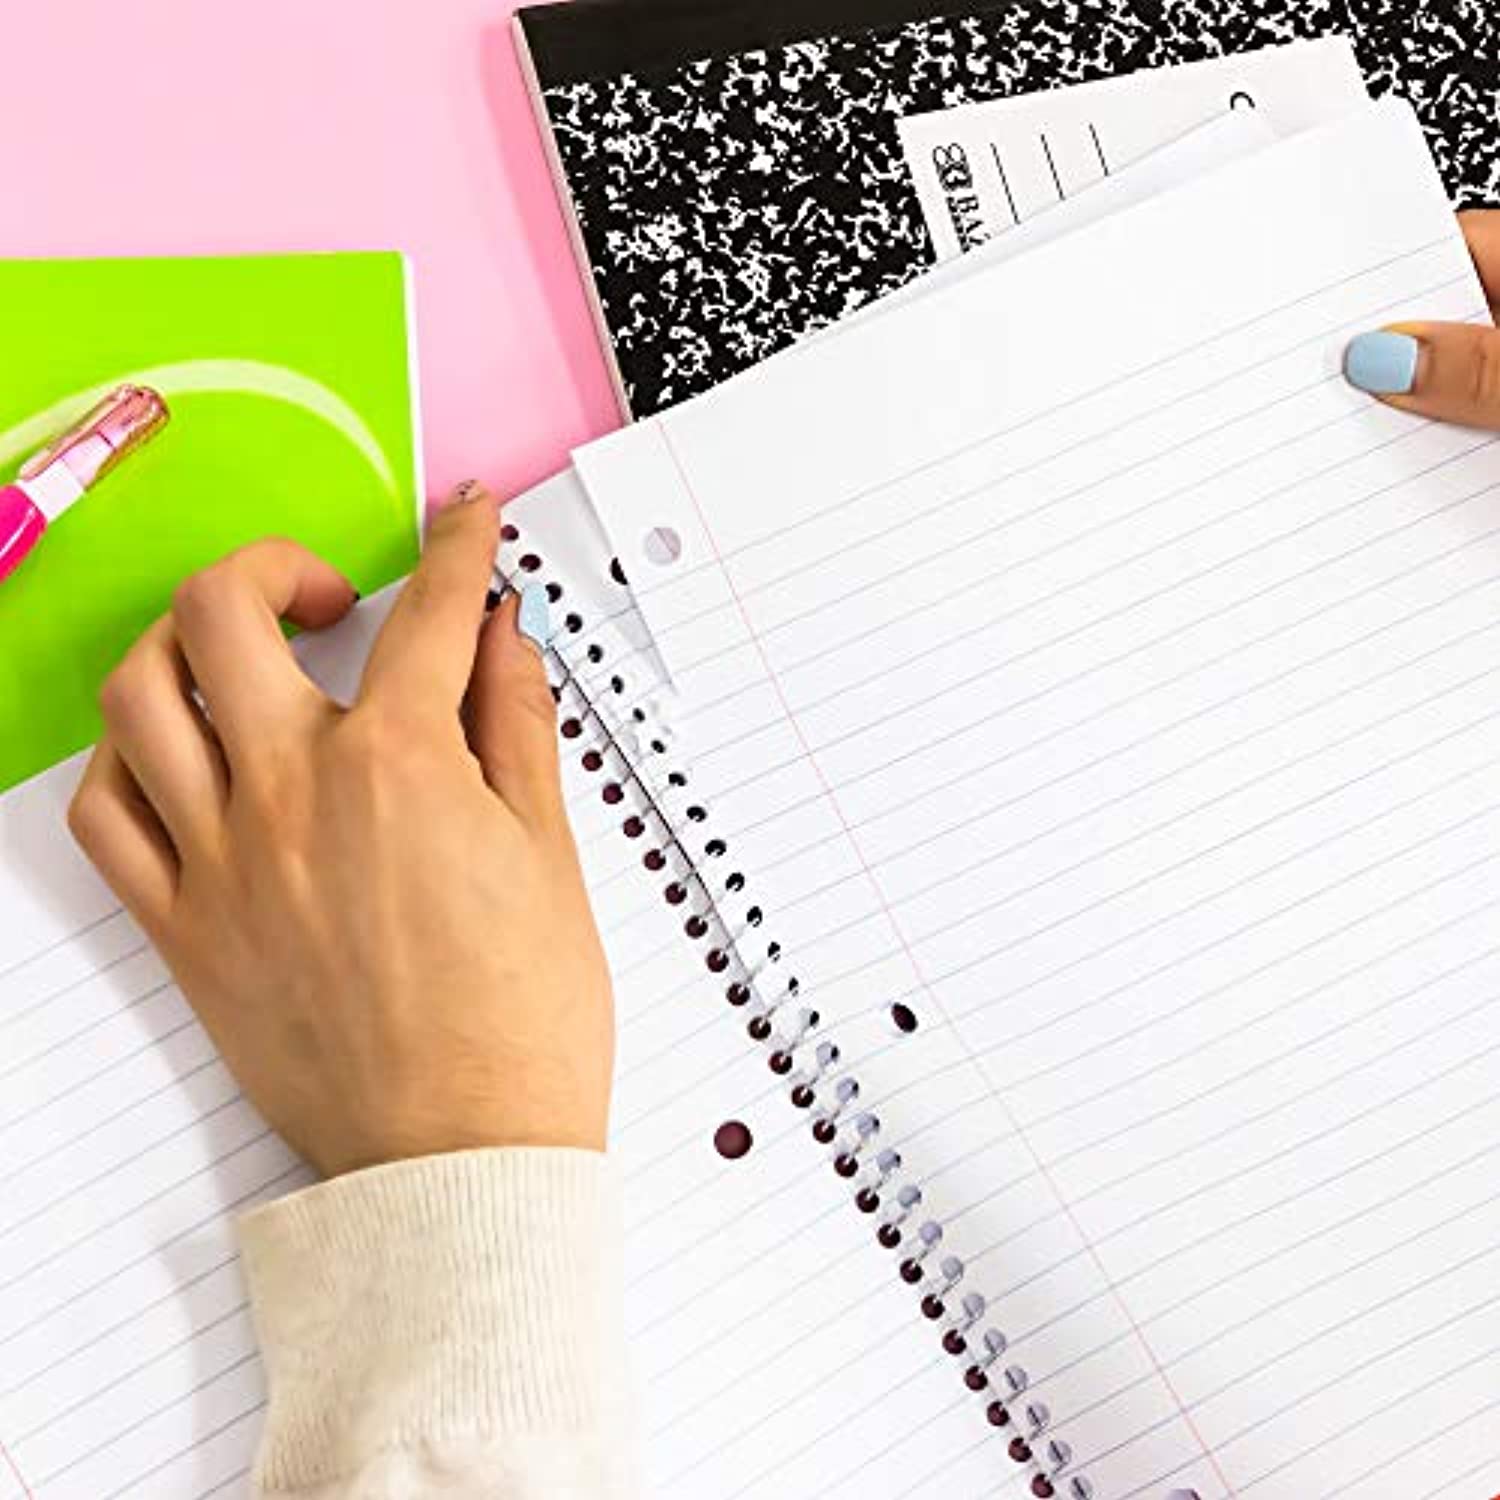 BAZIC College Ruled 120 Sheets 3-Subject Spiral Notebook, Writing Journal Dairy Assignment with Lined Notebooks, for Office Class Students, 24-Pack.